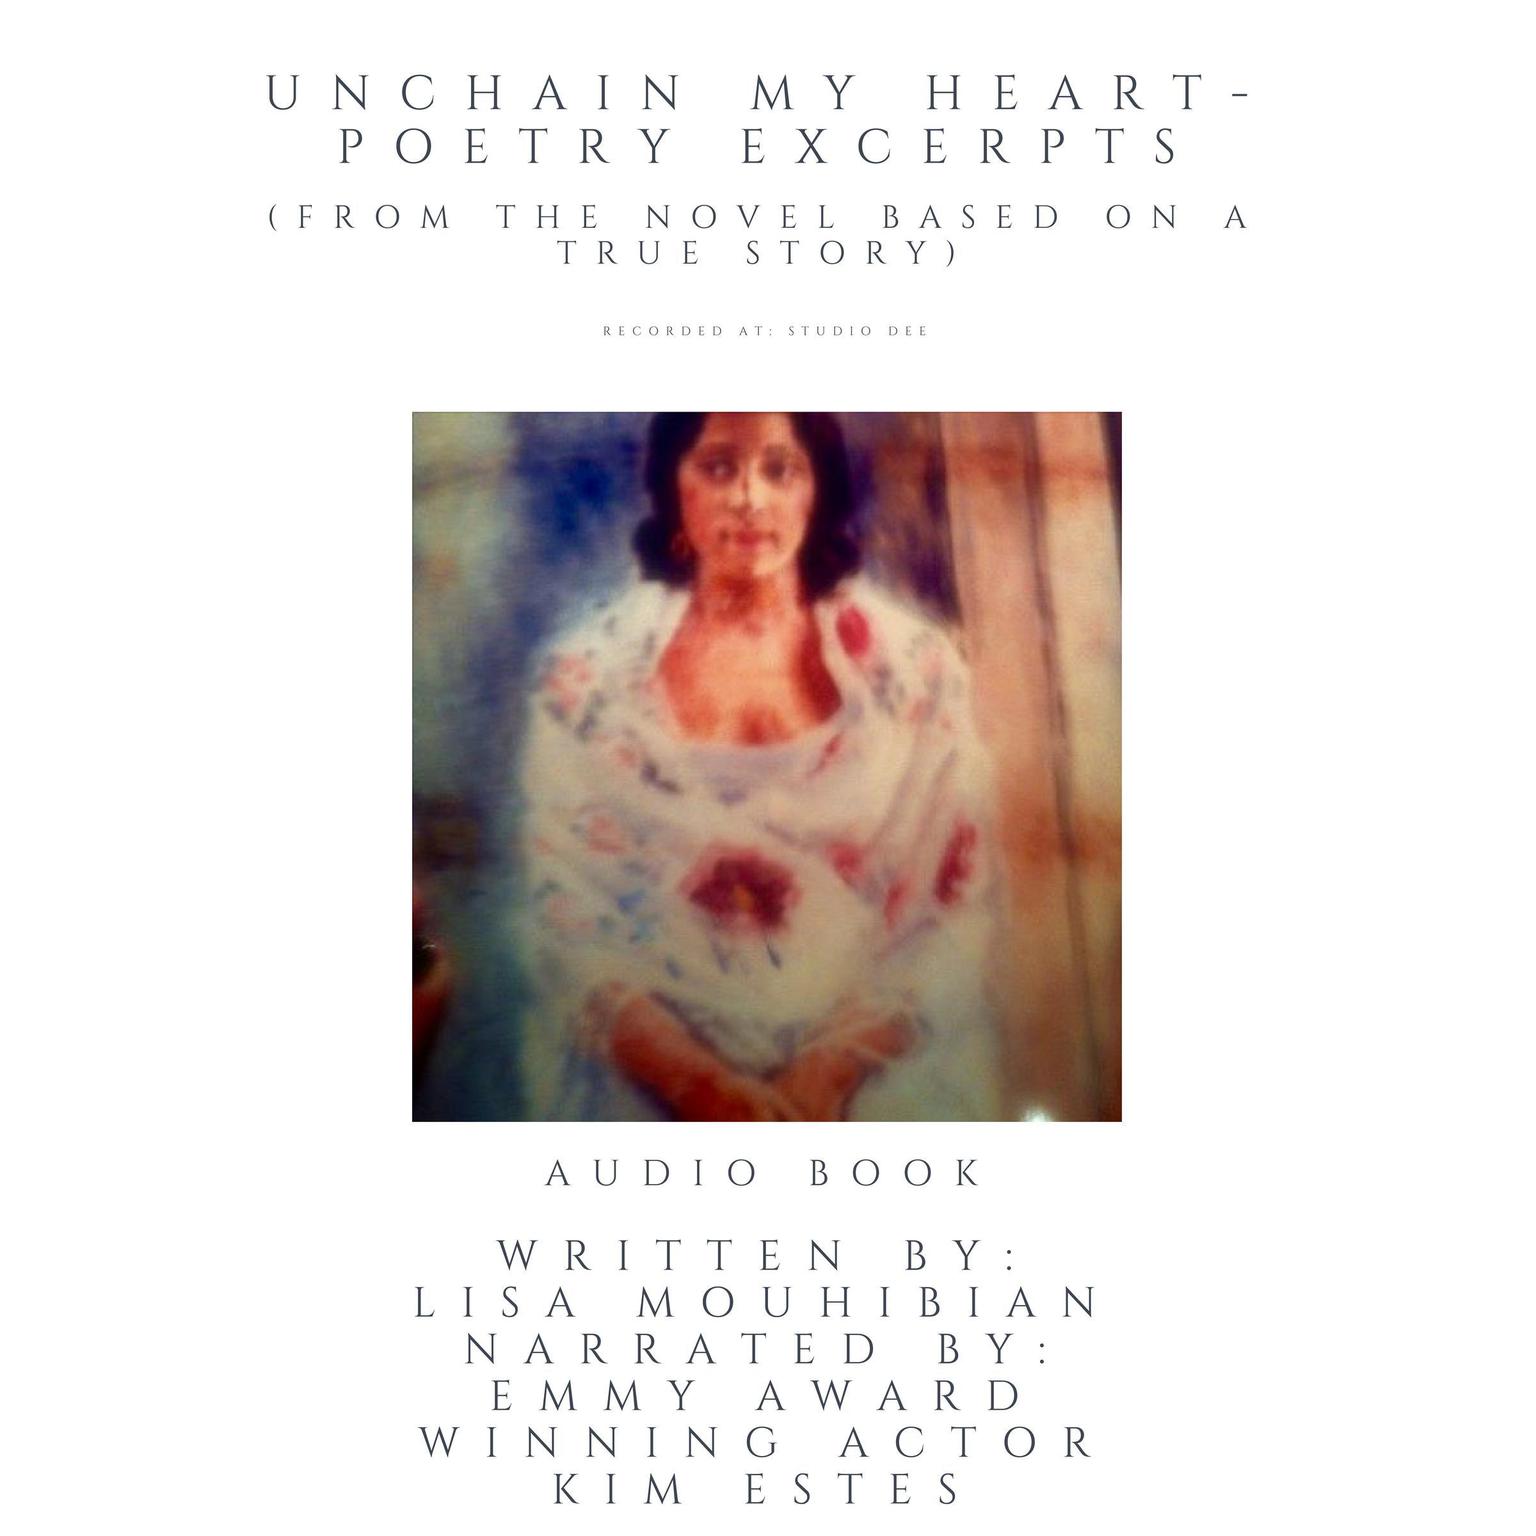 Unchain My Heart - Poetry Excerpts (from the the novel based on a true story) (Abridged) Audiobook, by Lisa Mouhibian